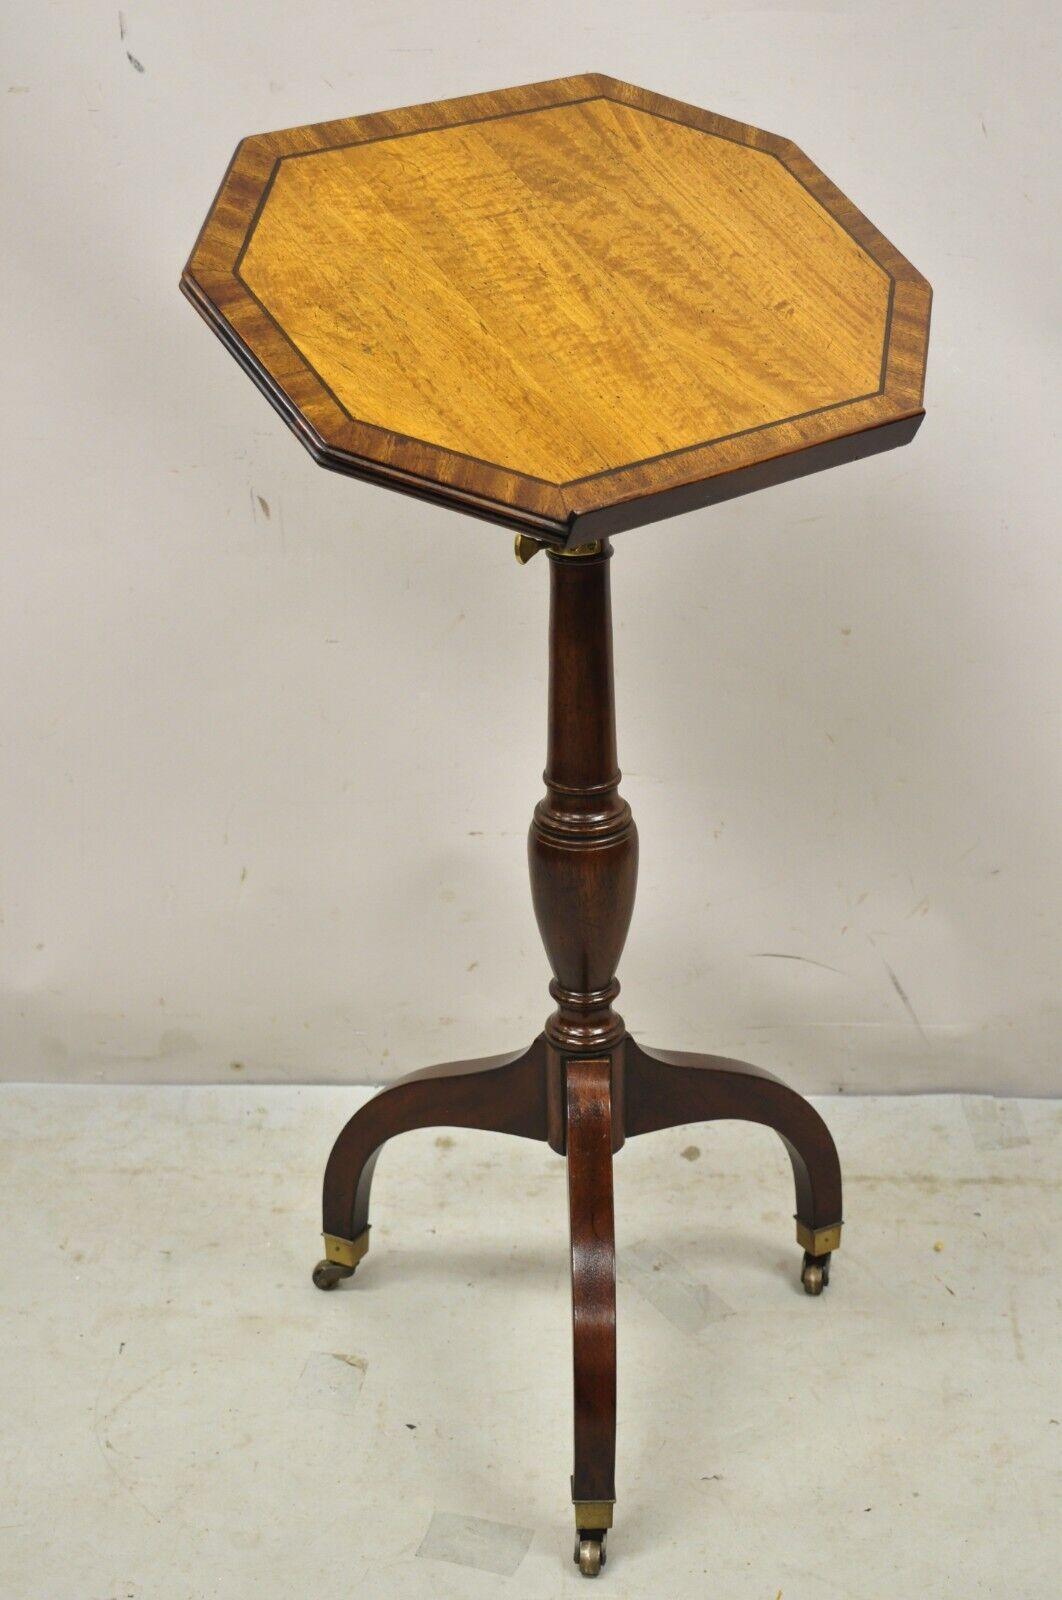 Vintage Knob Creek Mahogany & Satinwood Adjustable Lectern Book Stand. Item features an adjustable height, brass hardware, rolling casters, tripod base, beautiful wood grain, original label, quality American craftsmanship. Circa Late 20th Century.